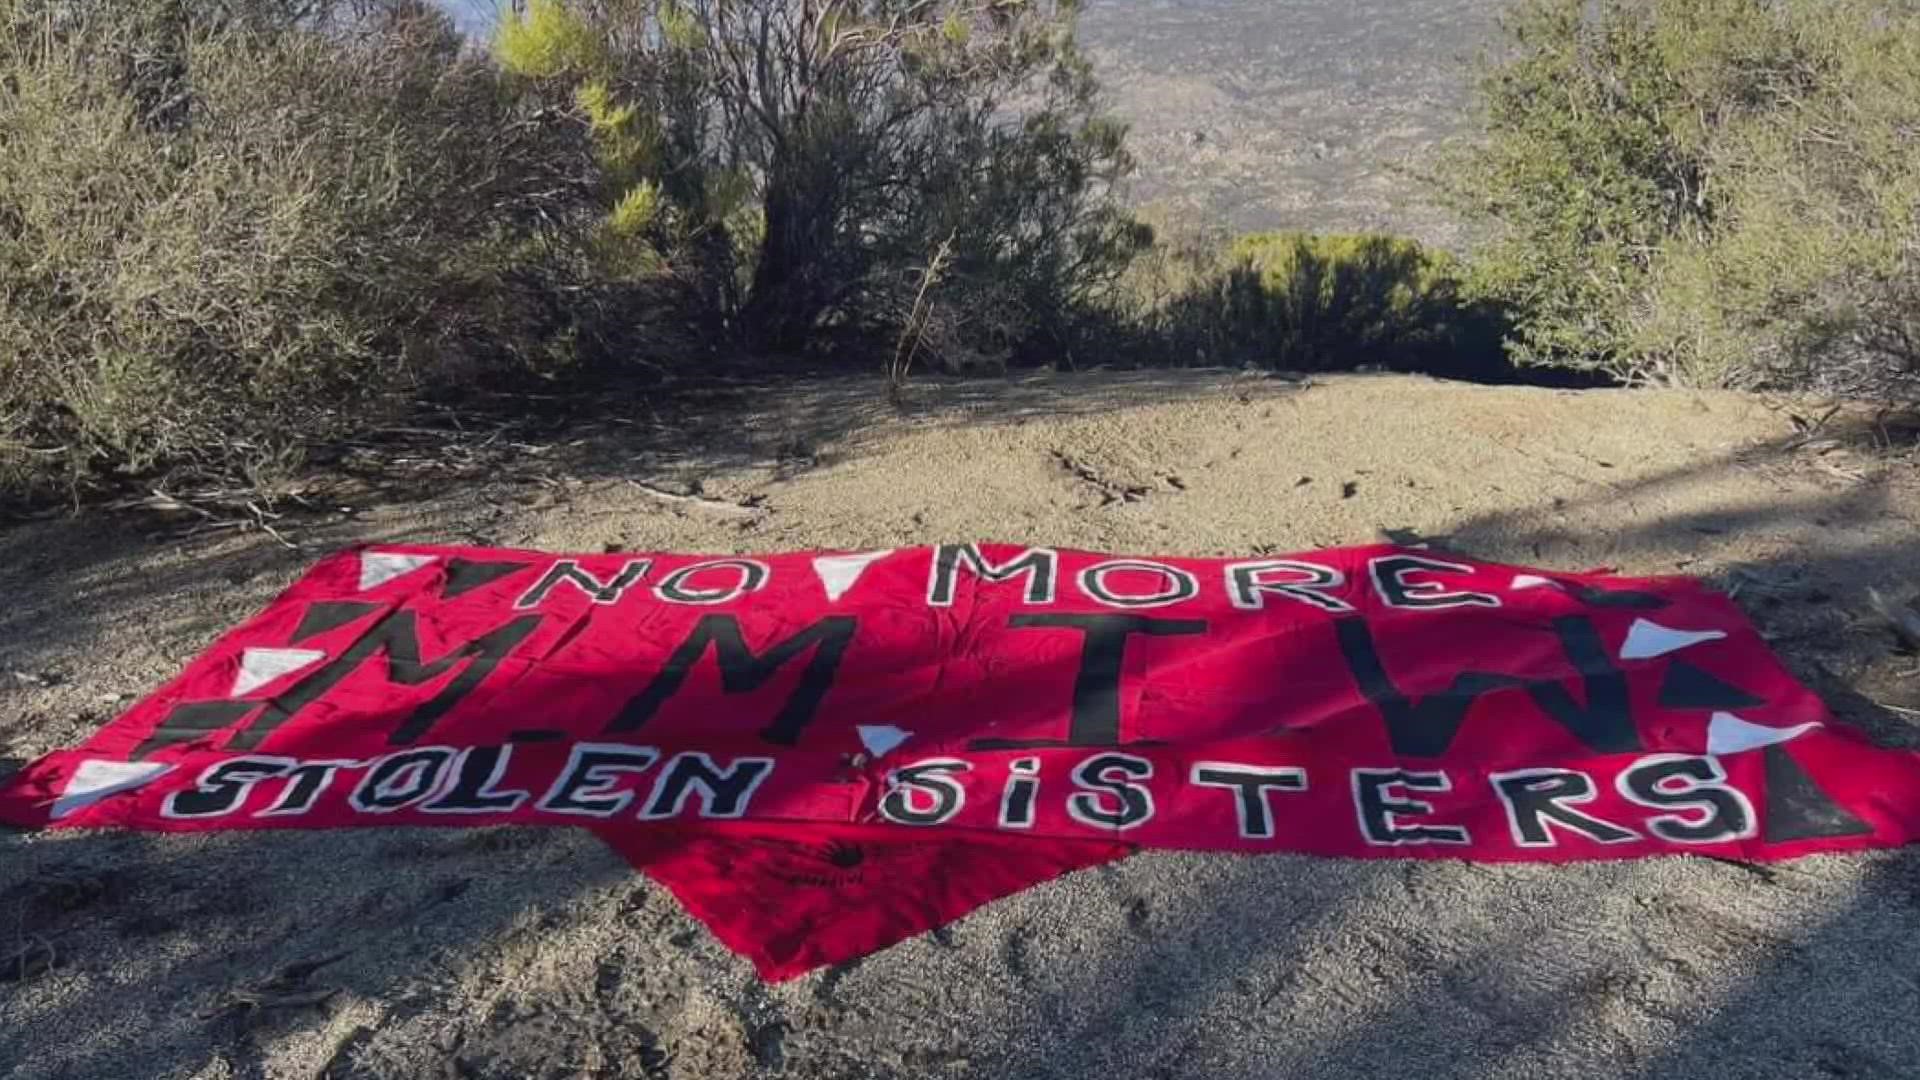 In Oct. 2022, the Yurok Tribe held its first policy summit to address the Missing and Murdered Indigenous Women crisis. We spoke with those affected by this issue.